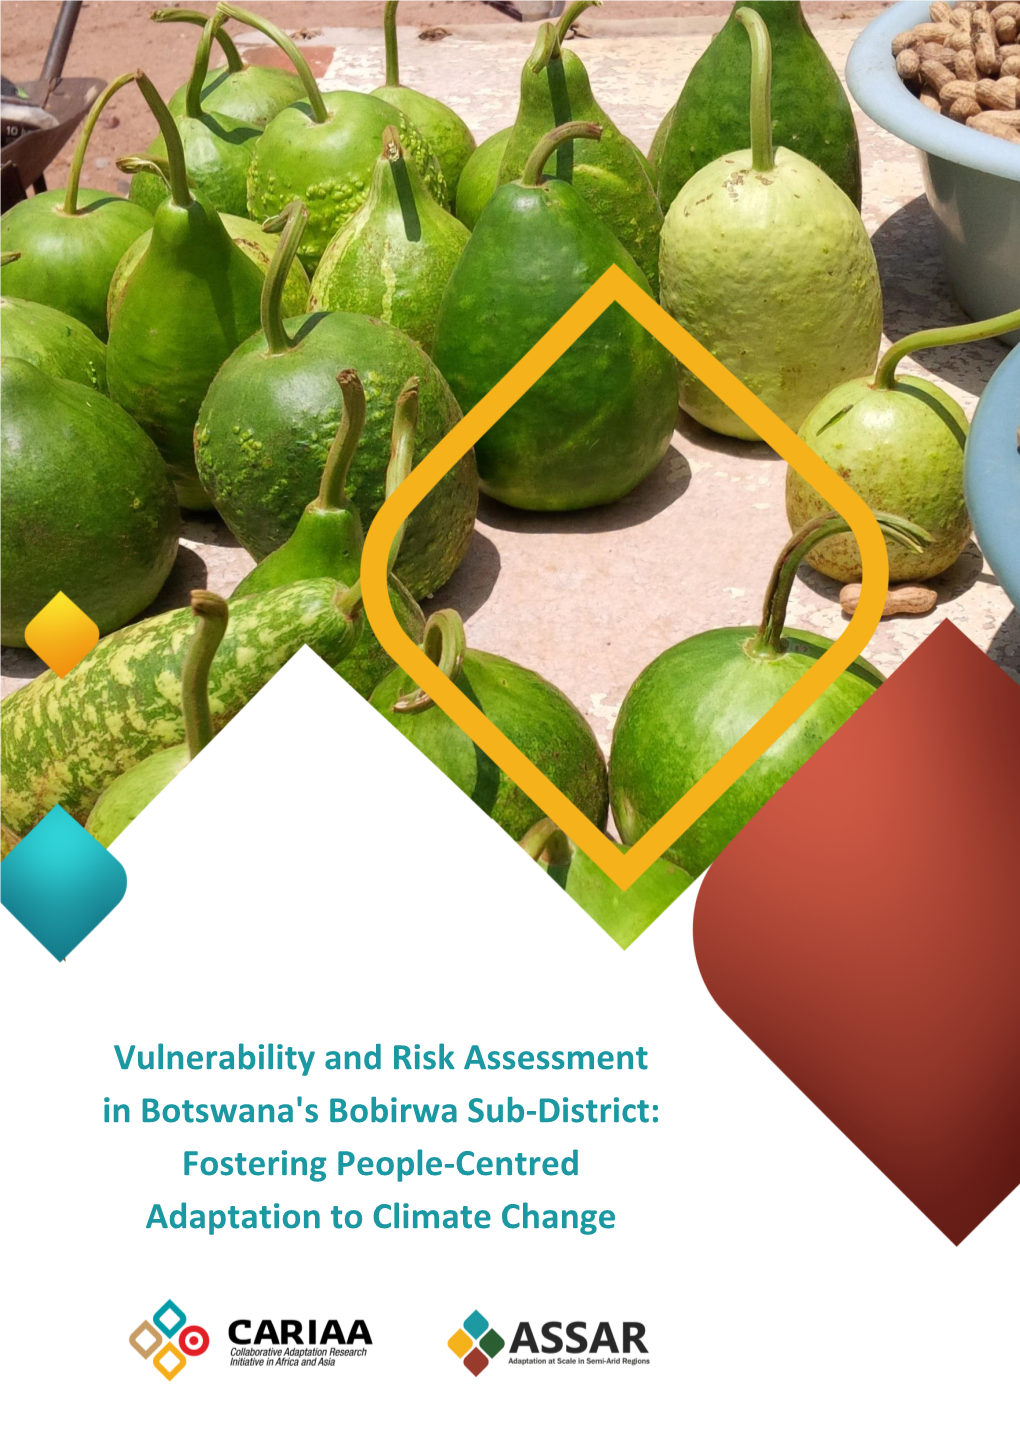 Vulnerability and Risk Assessment in Botswana's Bobirwa Sub-District: Fostering People-Centred Adaptation to Climate Change